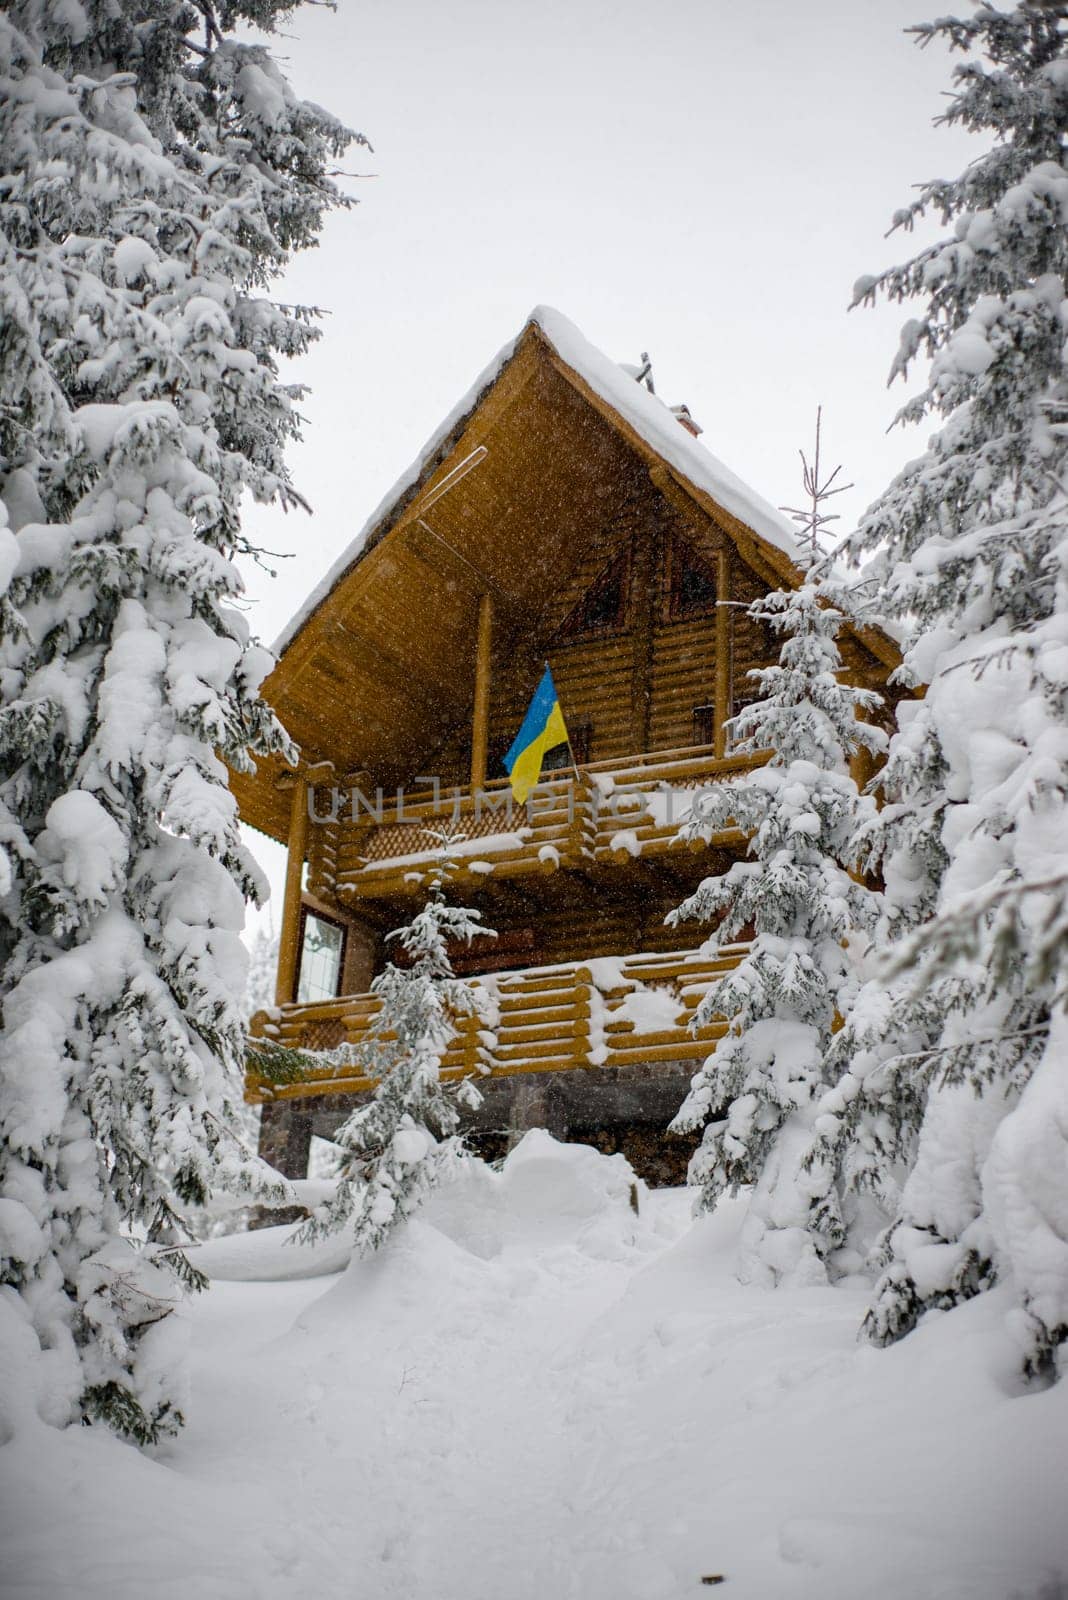 New wooden house in the forest. Snowing. house flag of Ukraine